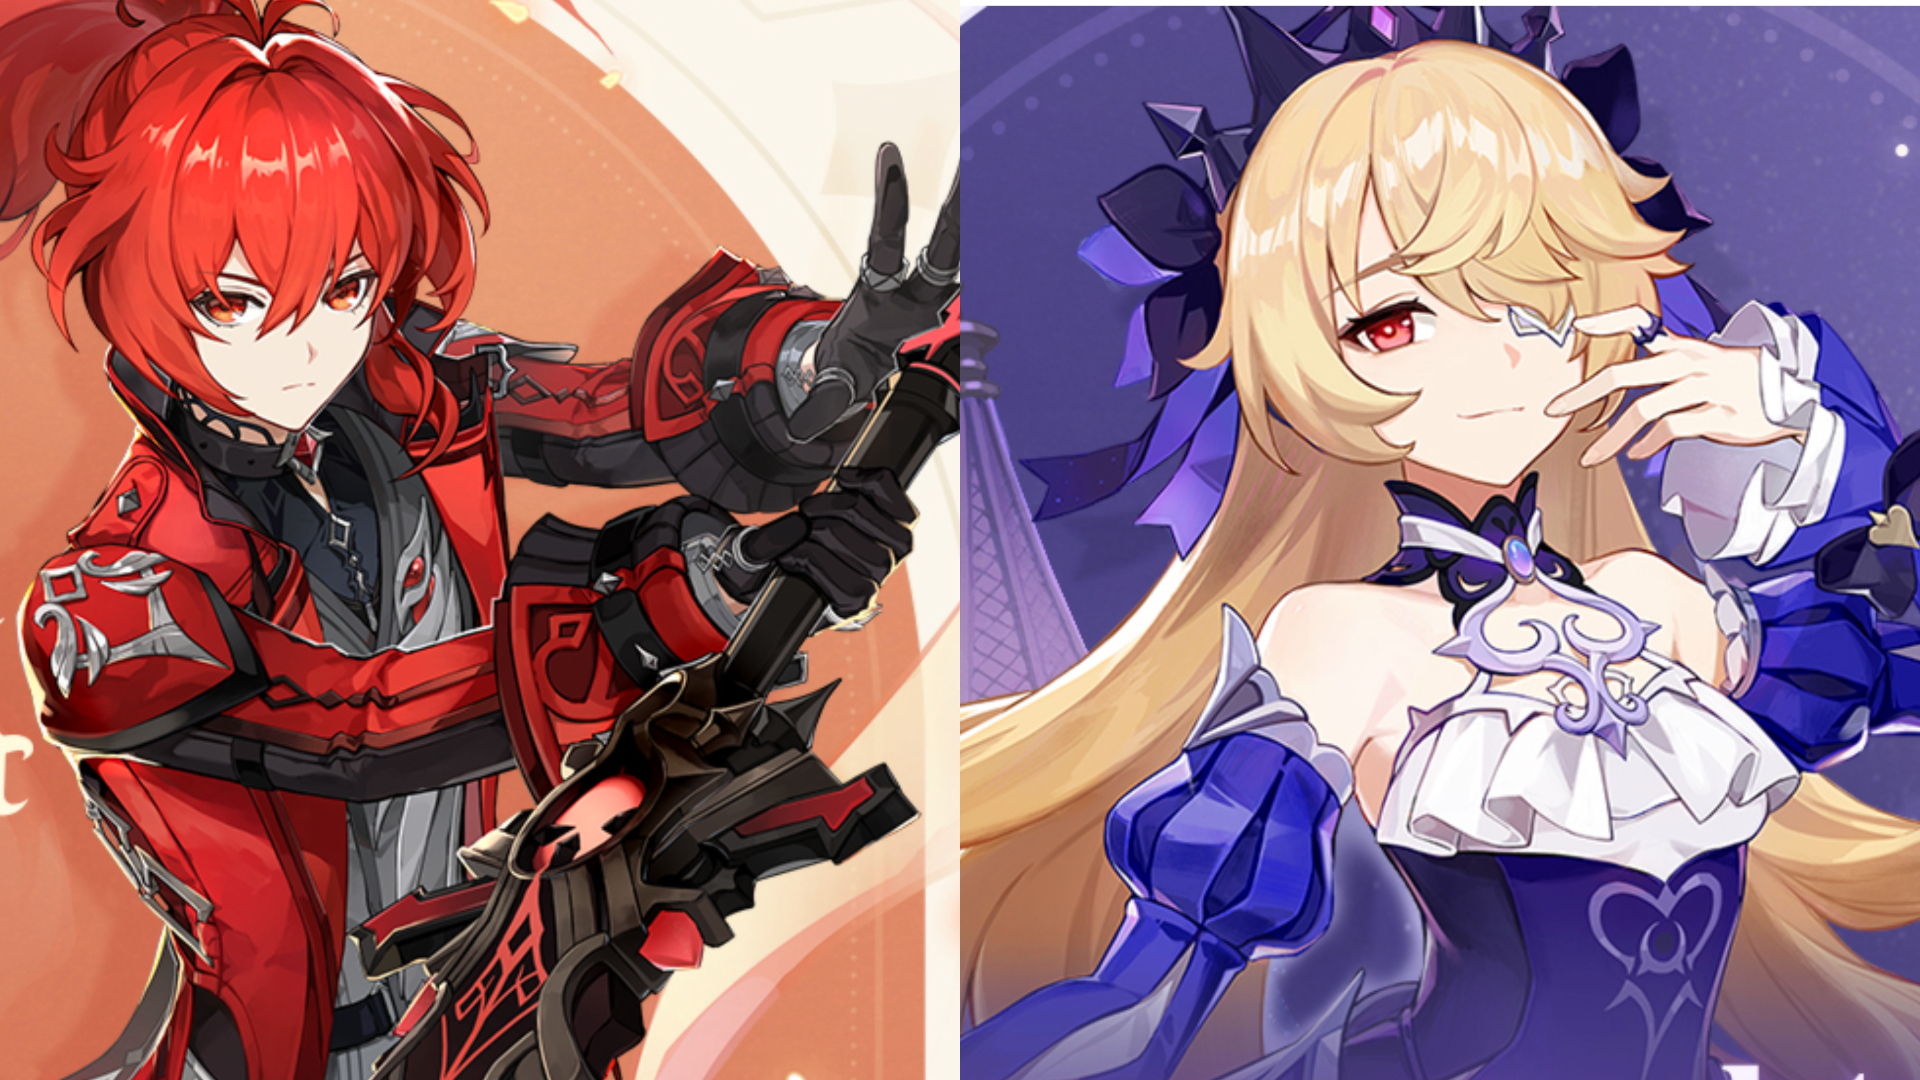 Genshin Impact Klee and Kaeya skins could be coming in the near future: anime man with red hair next to anime girl with blonde hair